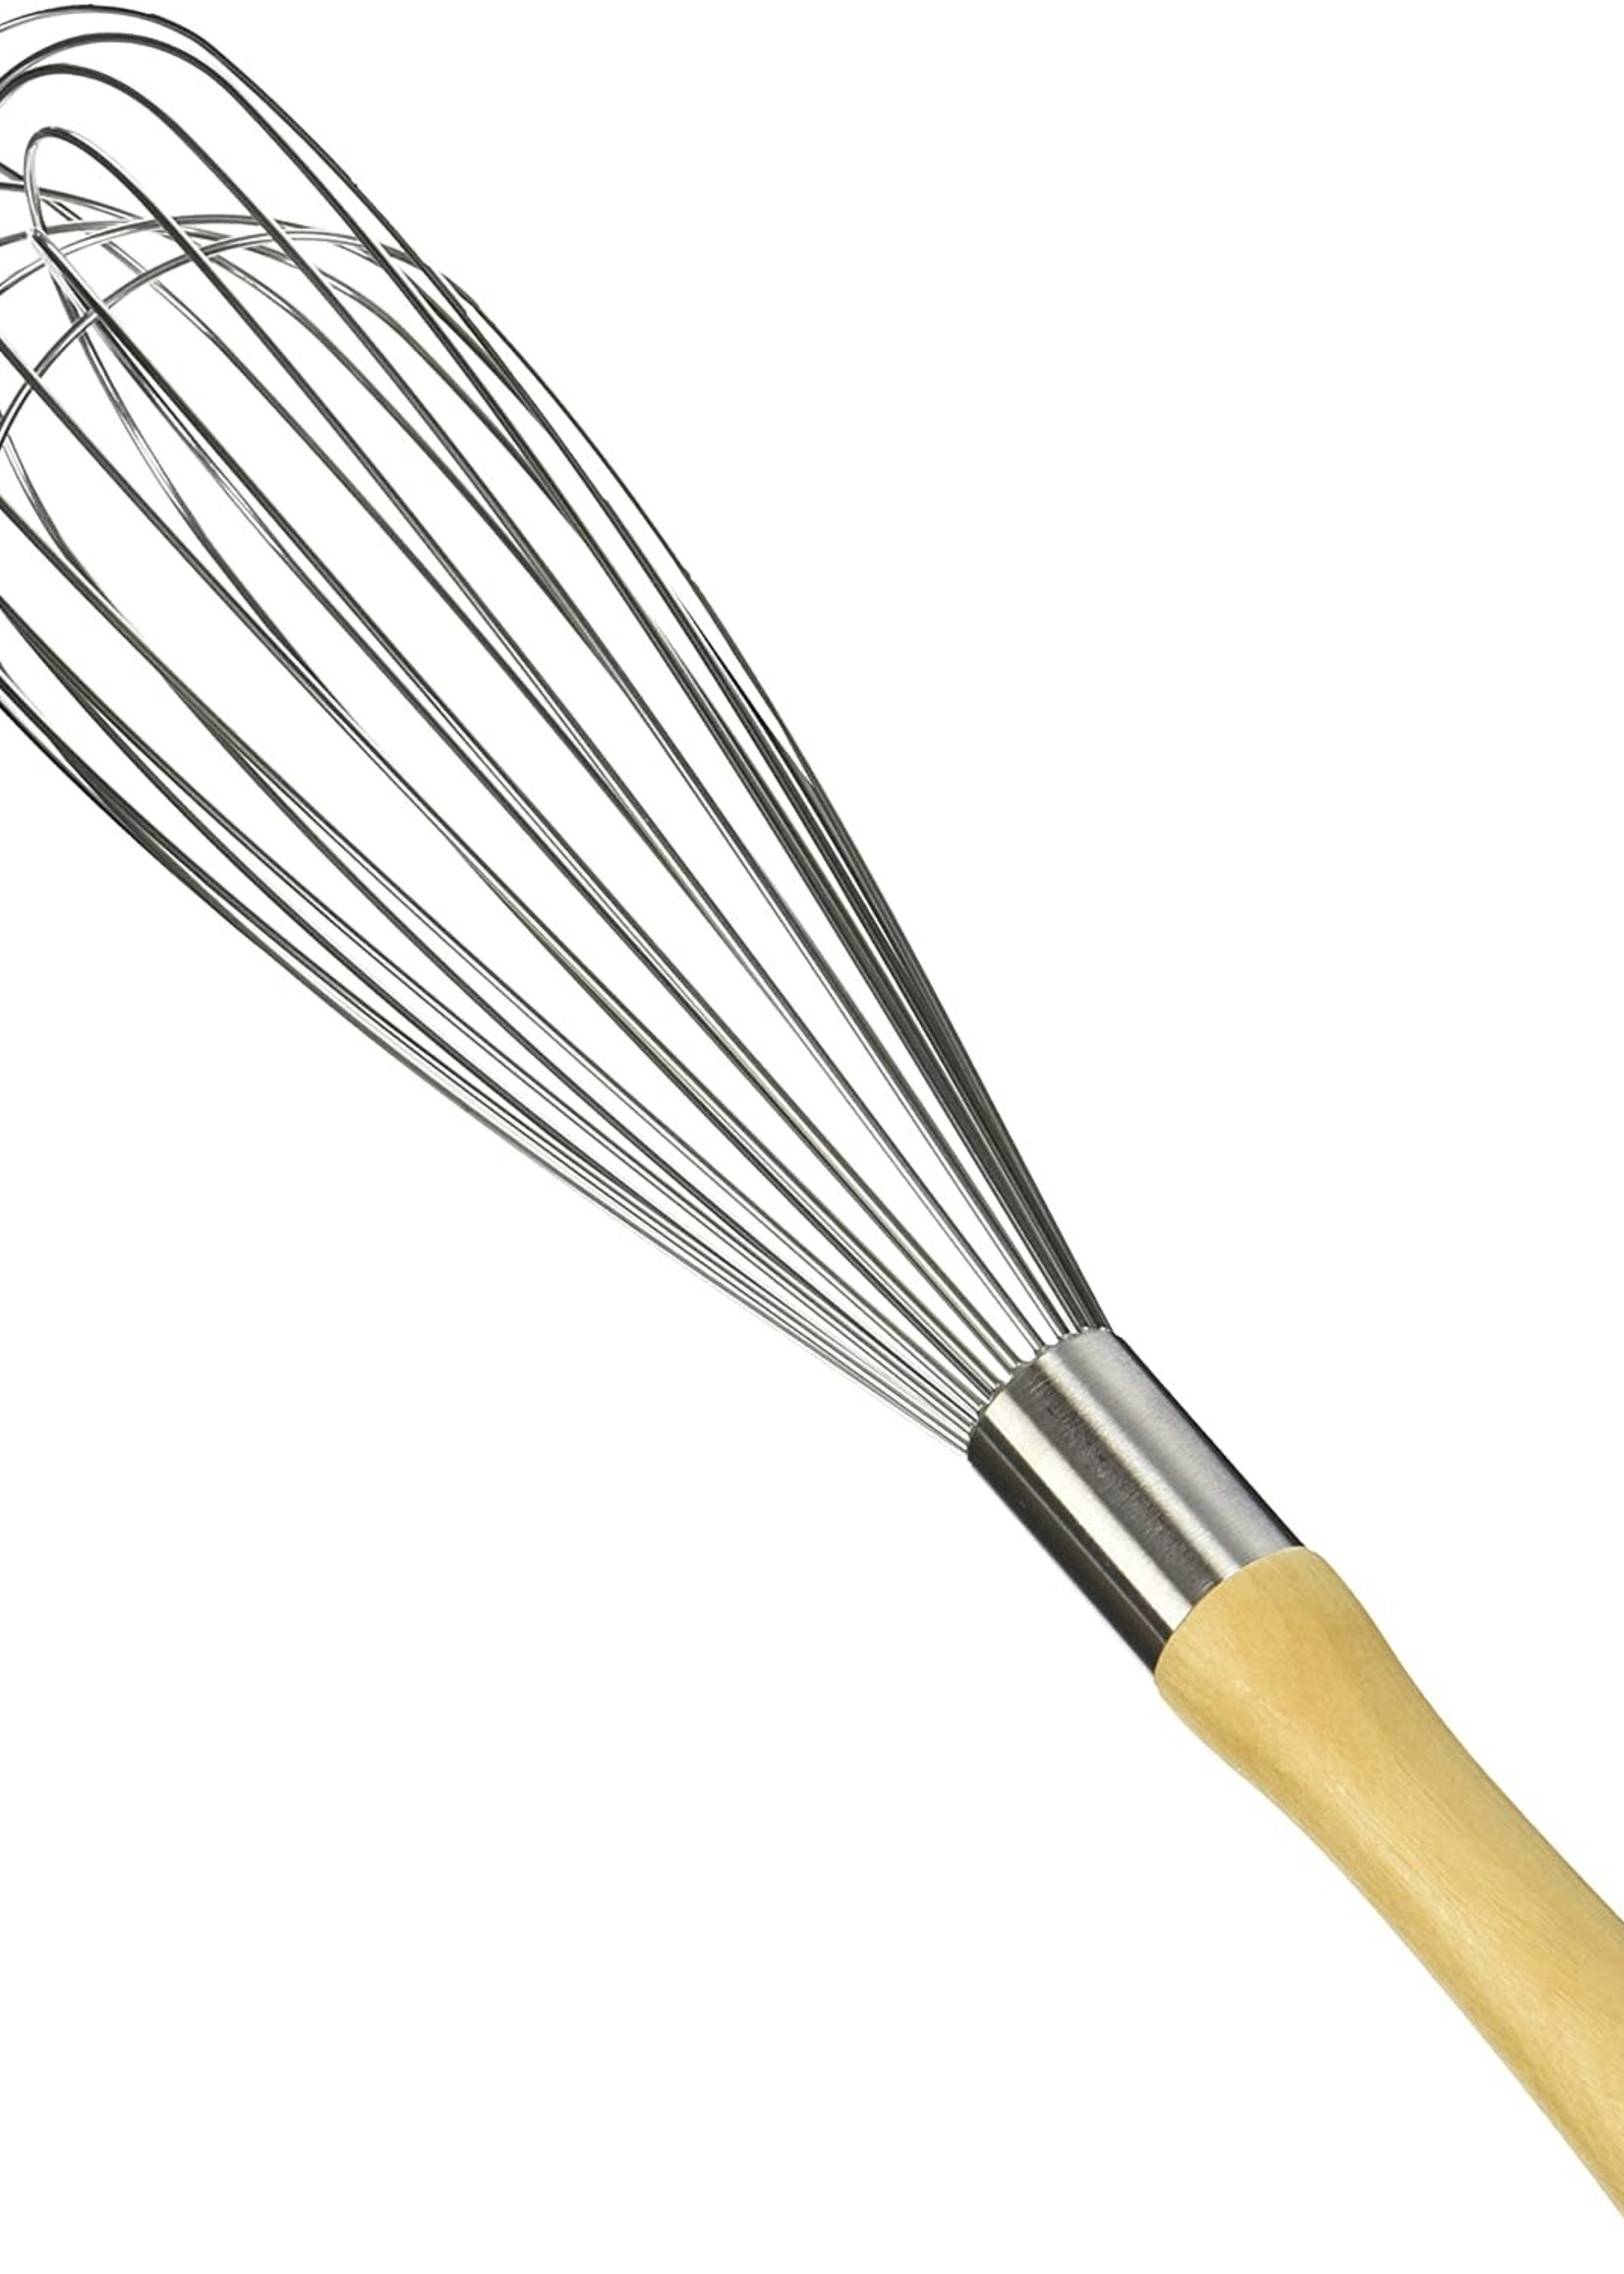 10 French Whisk with Wooden Handle